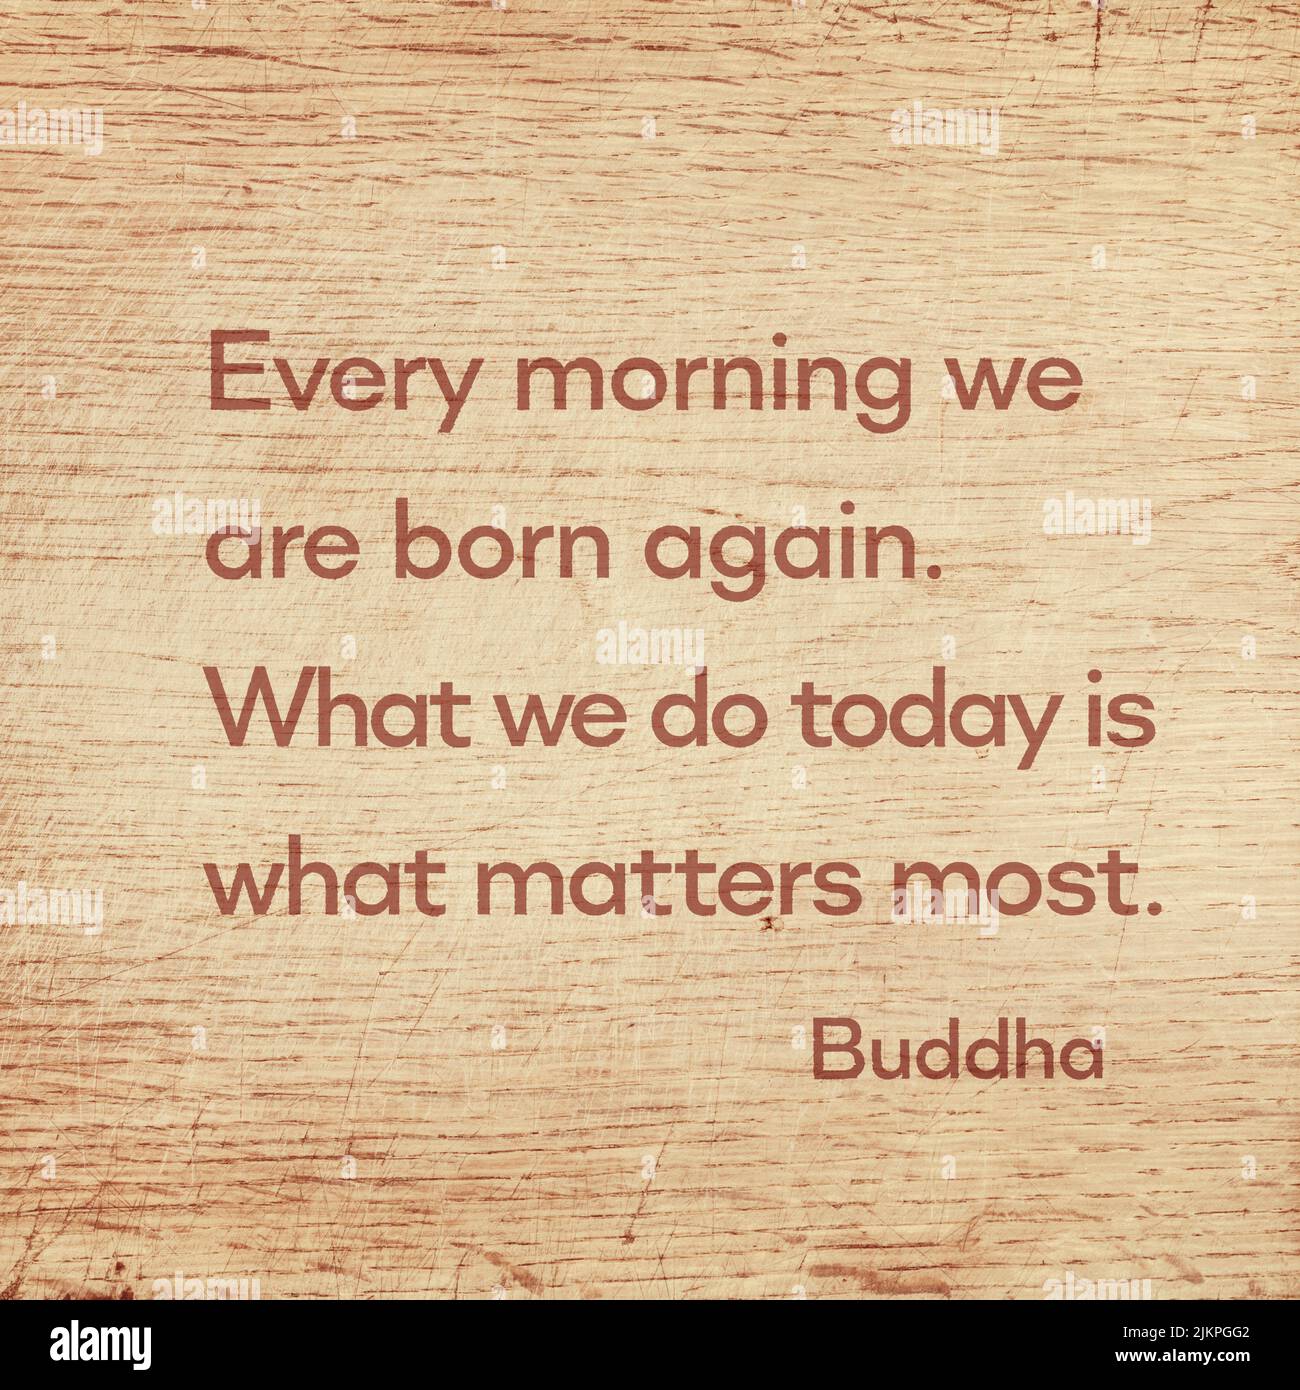 Every morning we are born again. What we do today is what matters most - famous quote of Gautama Buddha printed on grunge wooden board Stock Photo